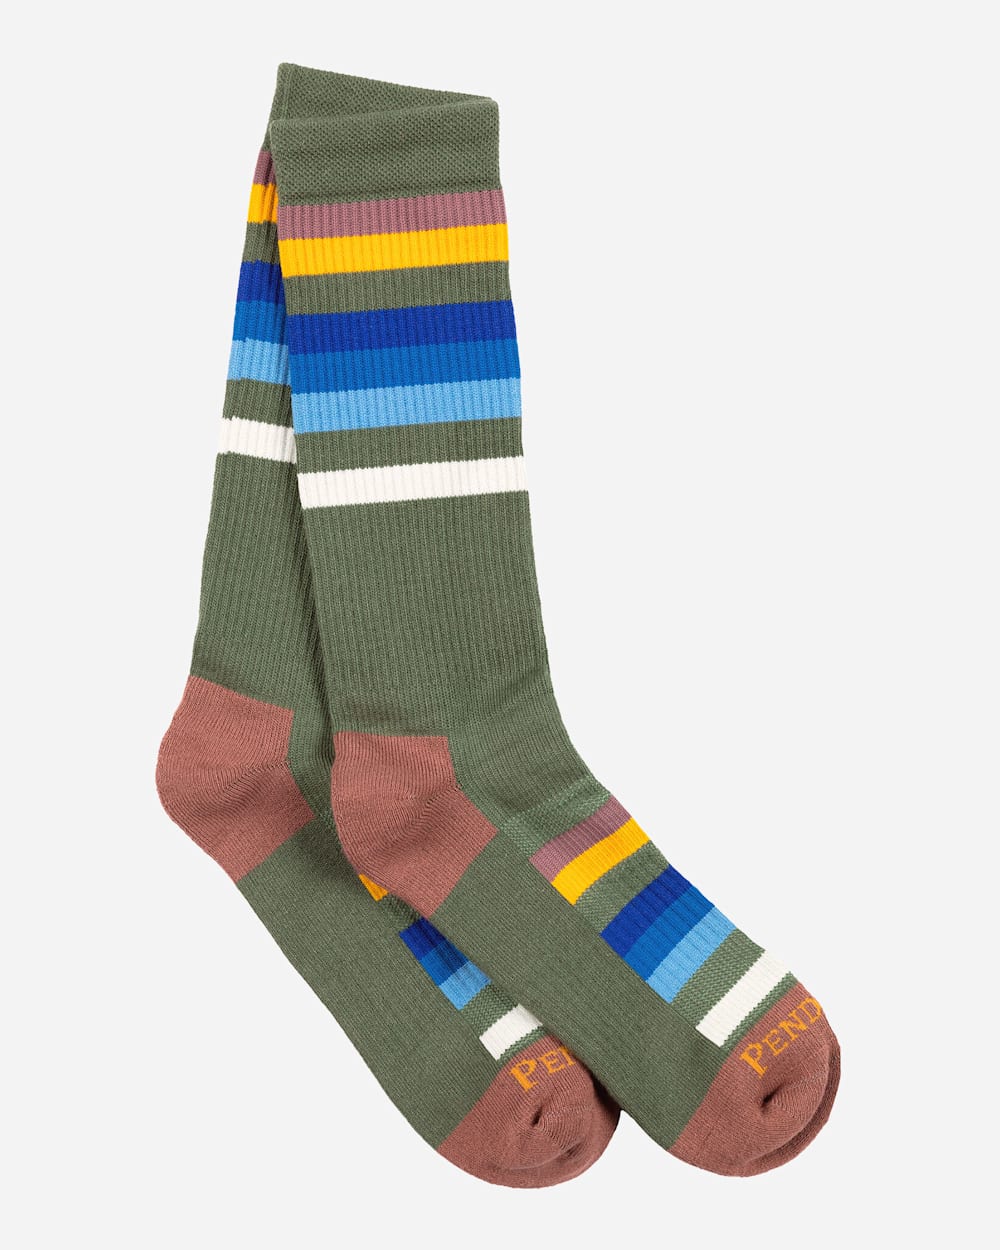 NATIONAL PARK ADVENTURE SOCKS IN ROCKY MOUNTAIN image number 1